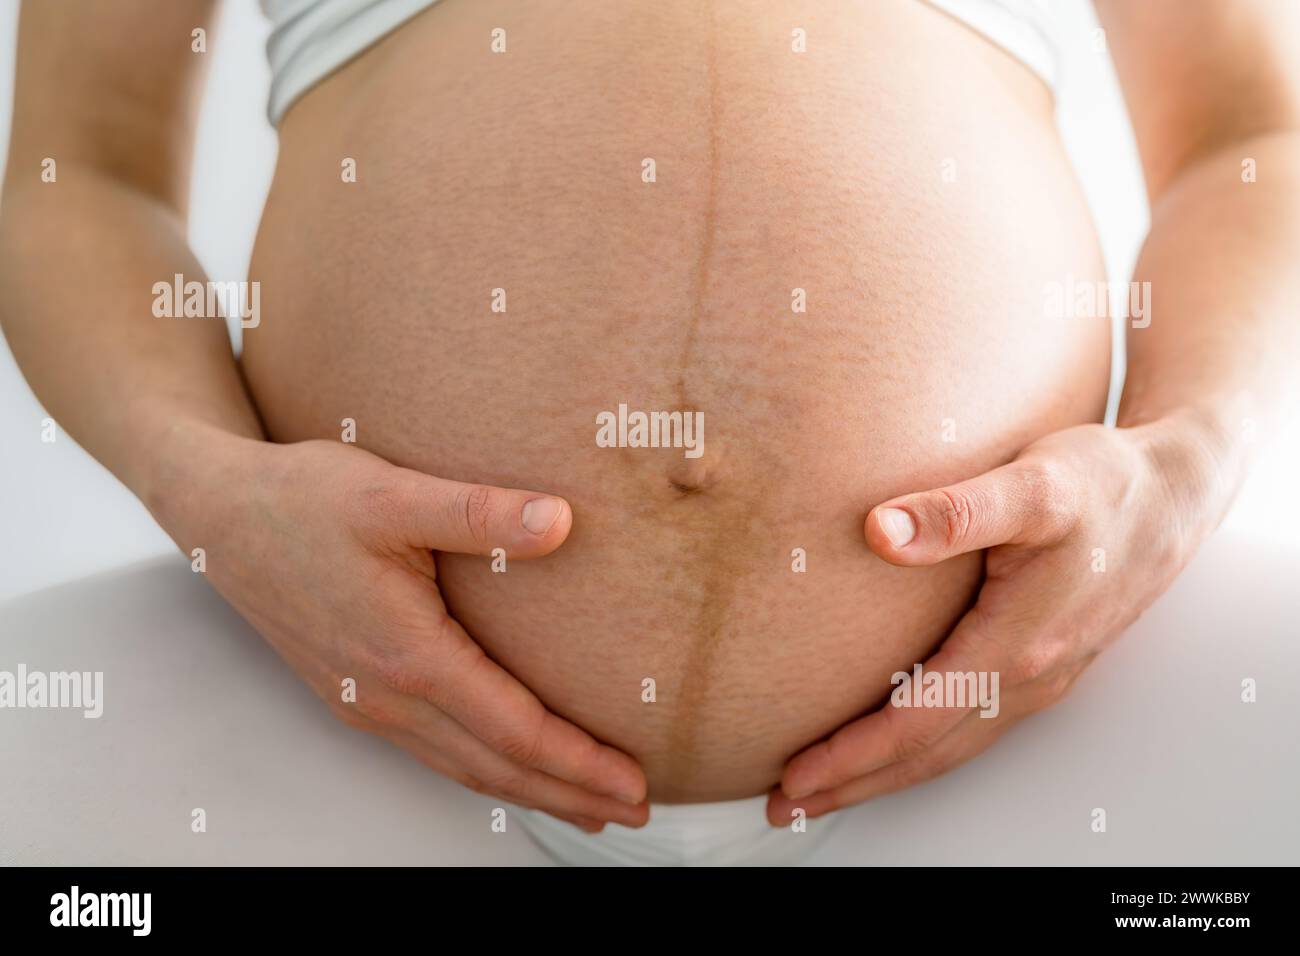 Description: Closeup of woman and gently holding her very round pregnant baby bump. Front view. White background. Bright shot. Stock Photo